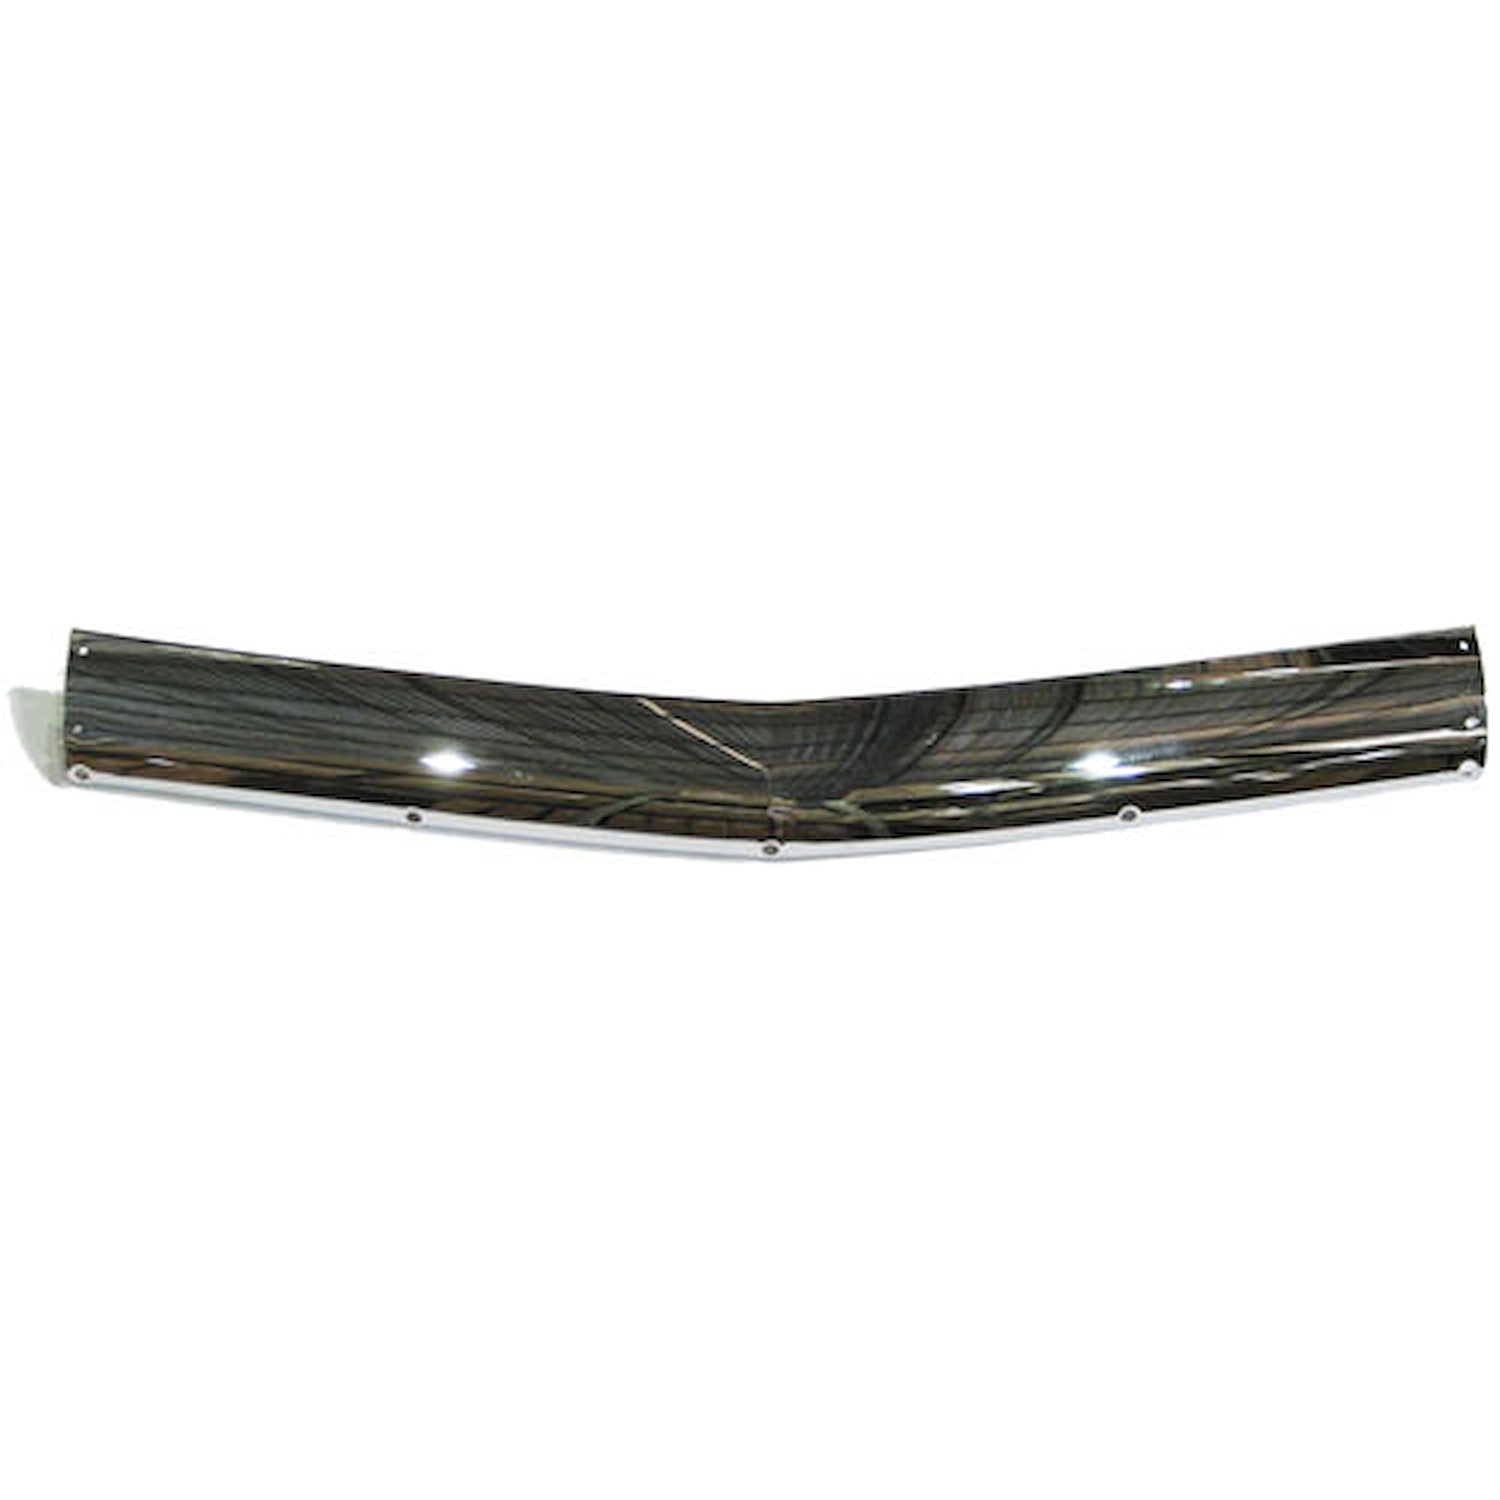 GR13-54C Grille Molding 1954 Chevy Two-Ten Series, Center